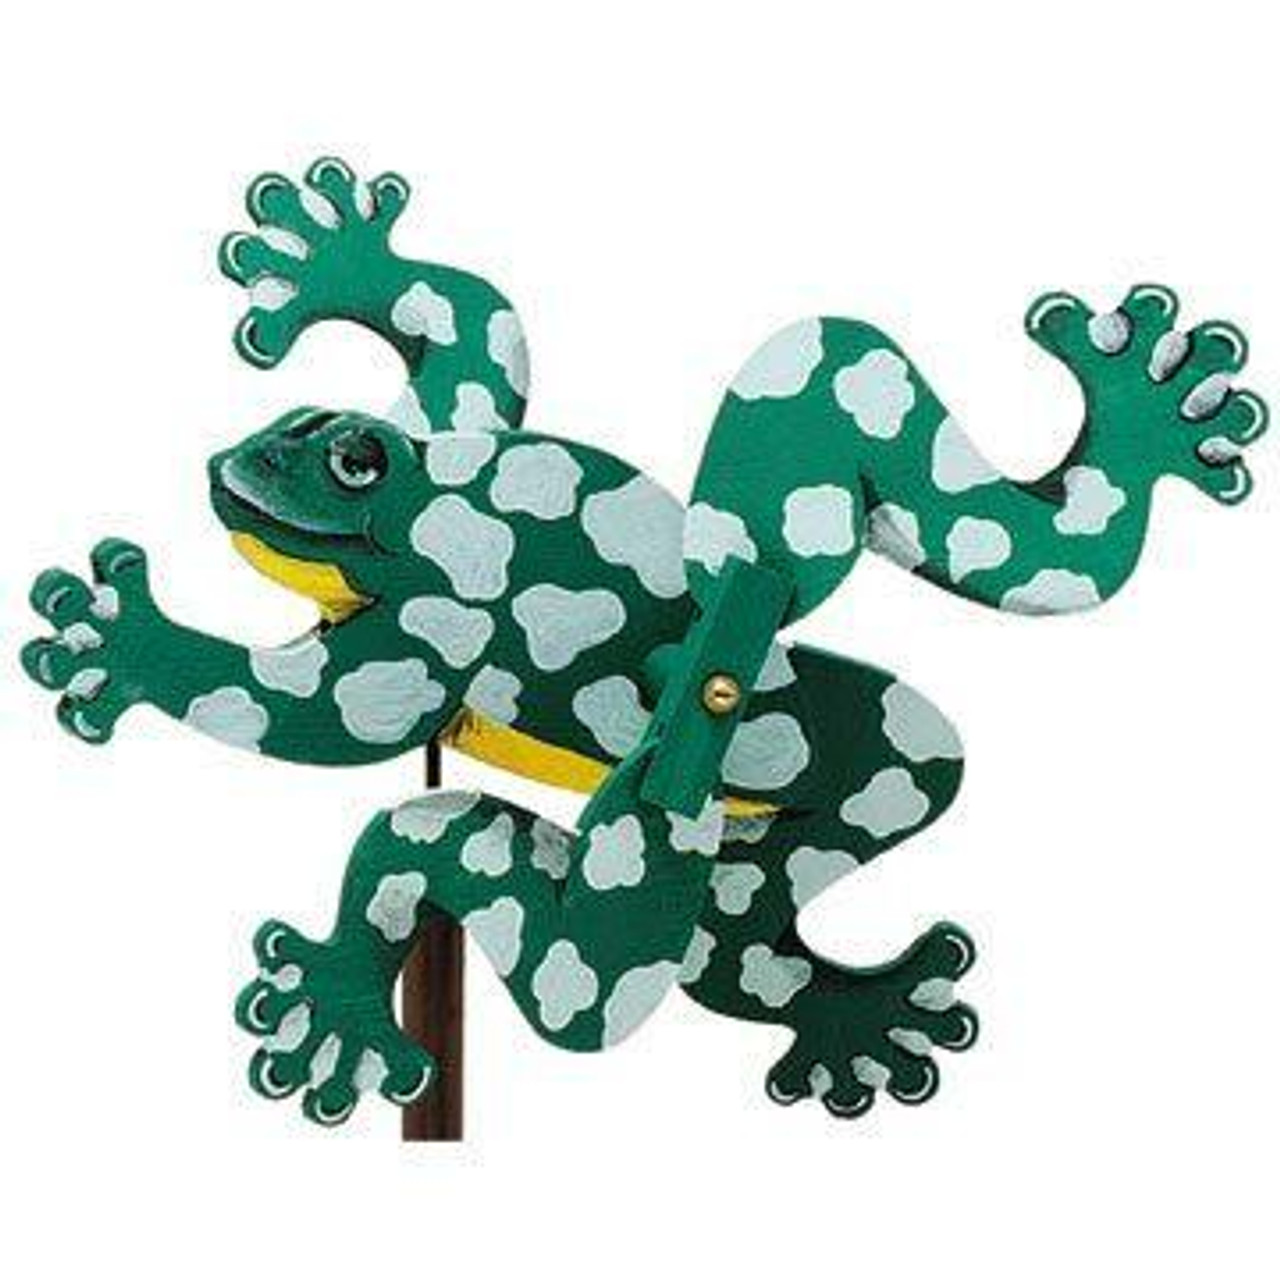 Freddy The Frog Woodworking Plan